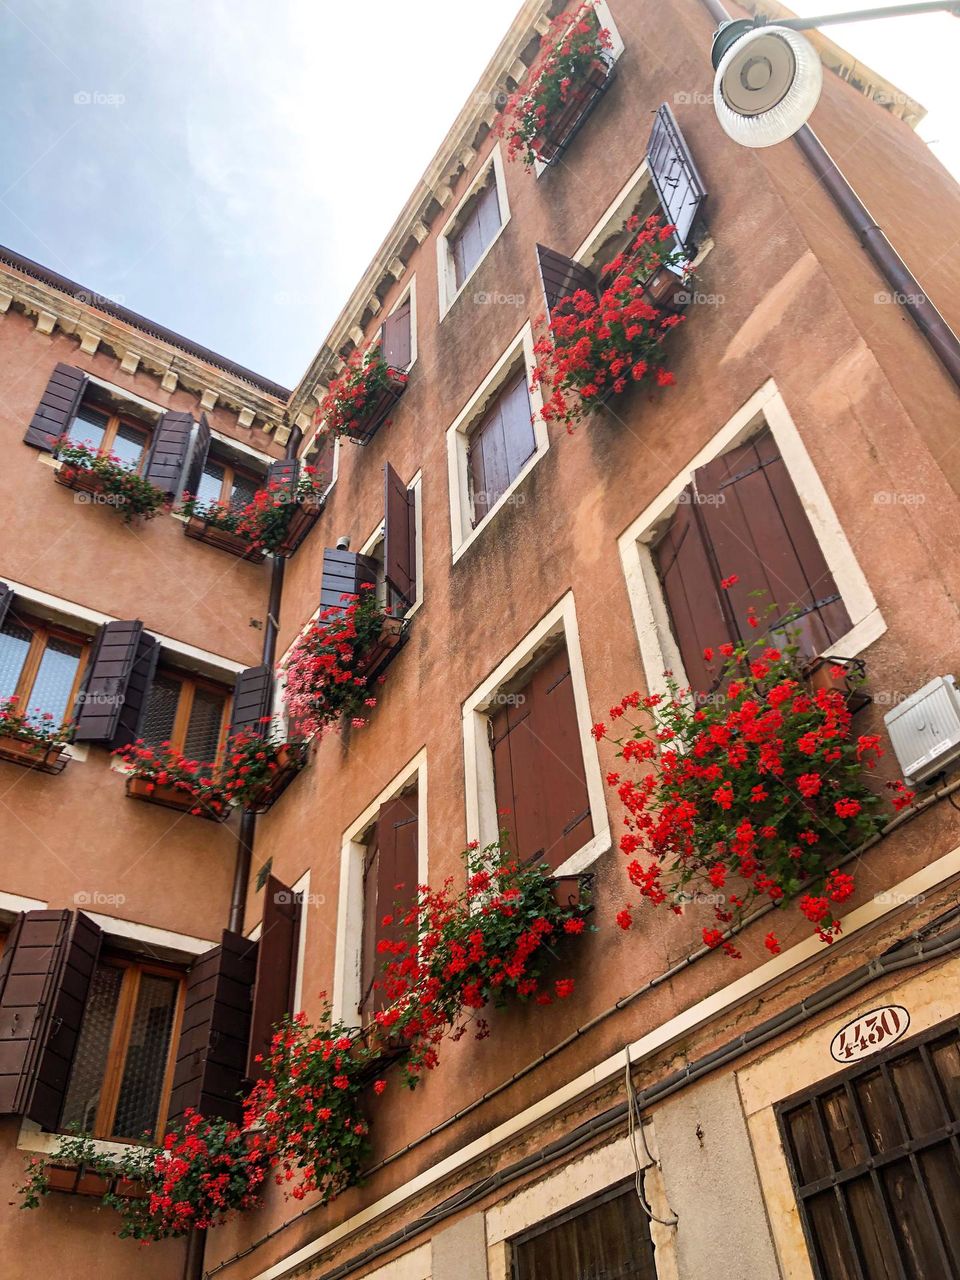 Building with flowers in Venice 